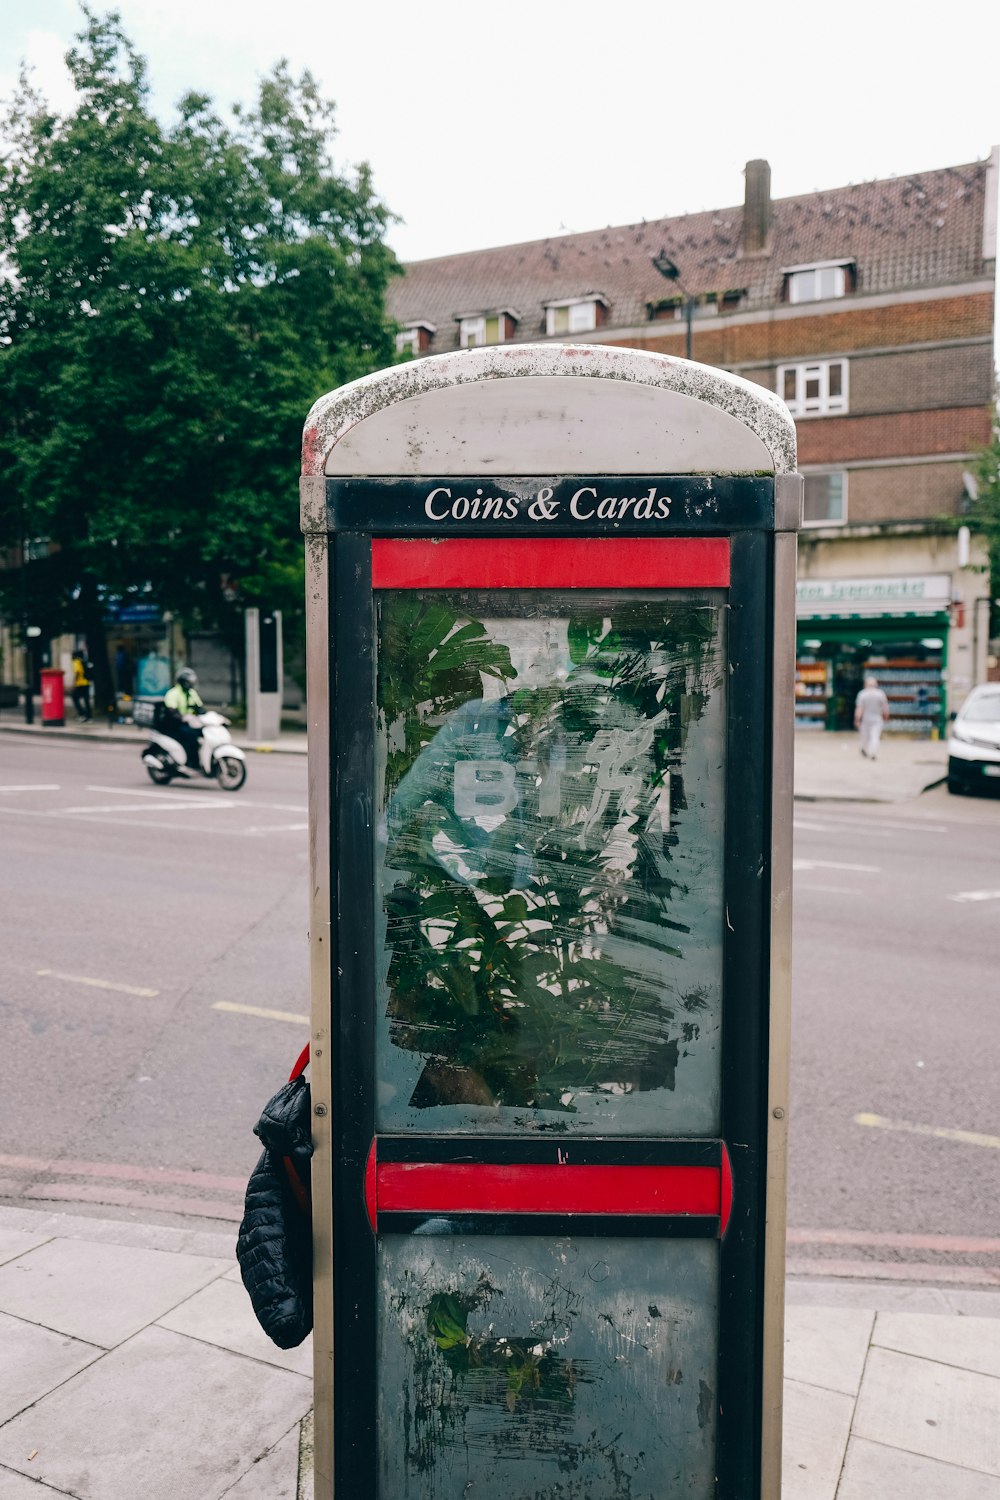 a public phone booth on a city street